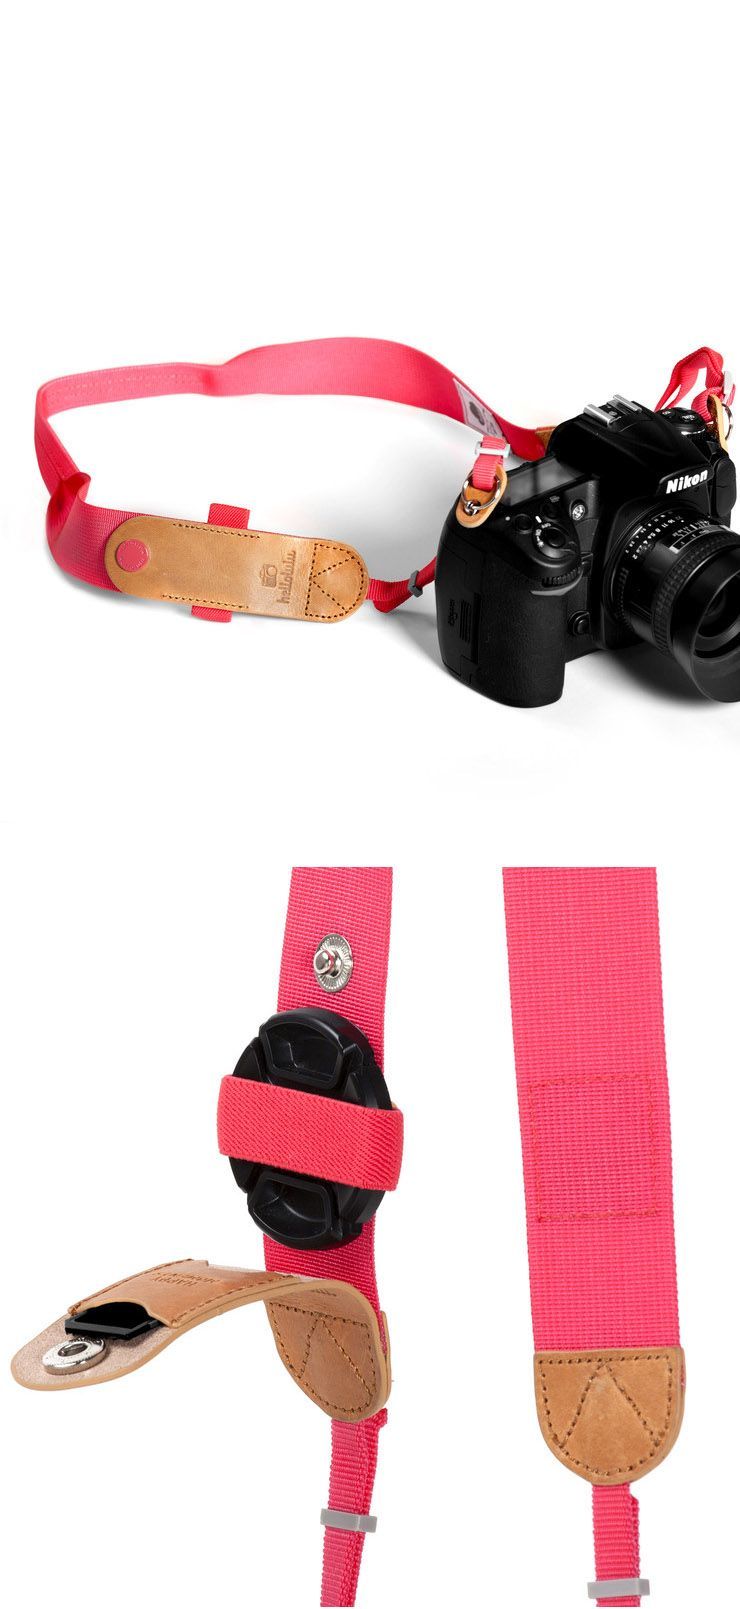 Camera strap with lens cap holder…wish I would have had this before I lost my